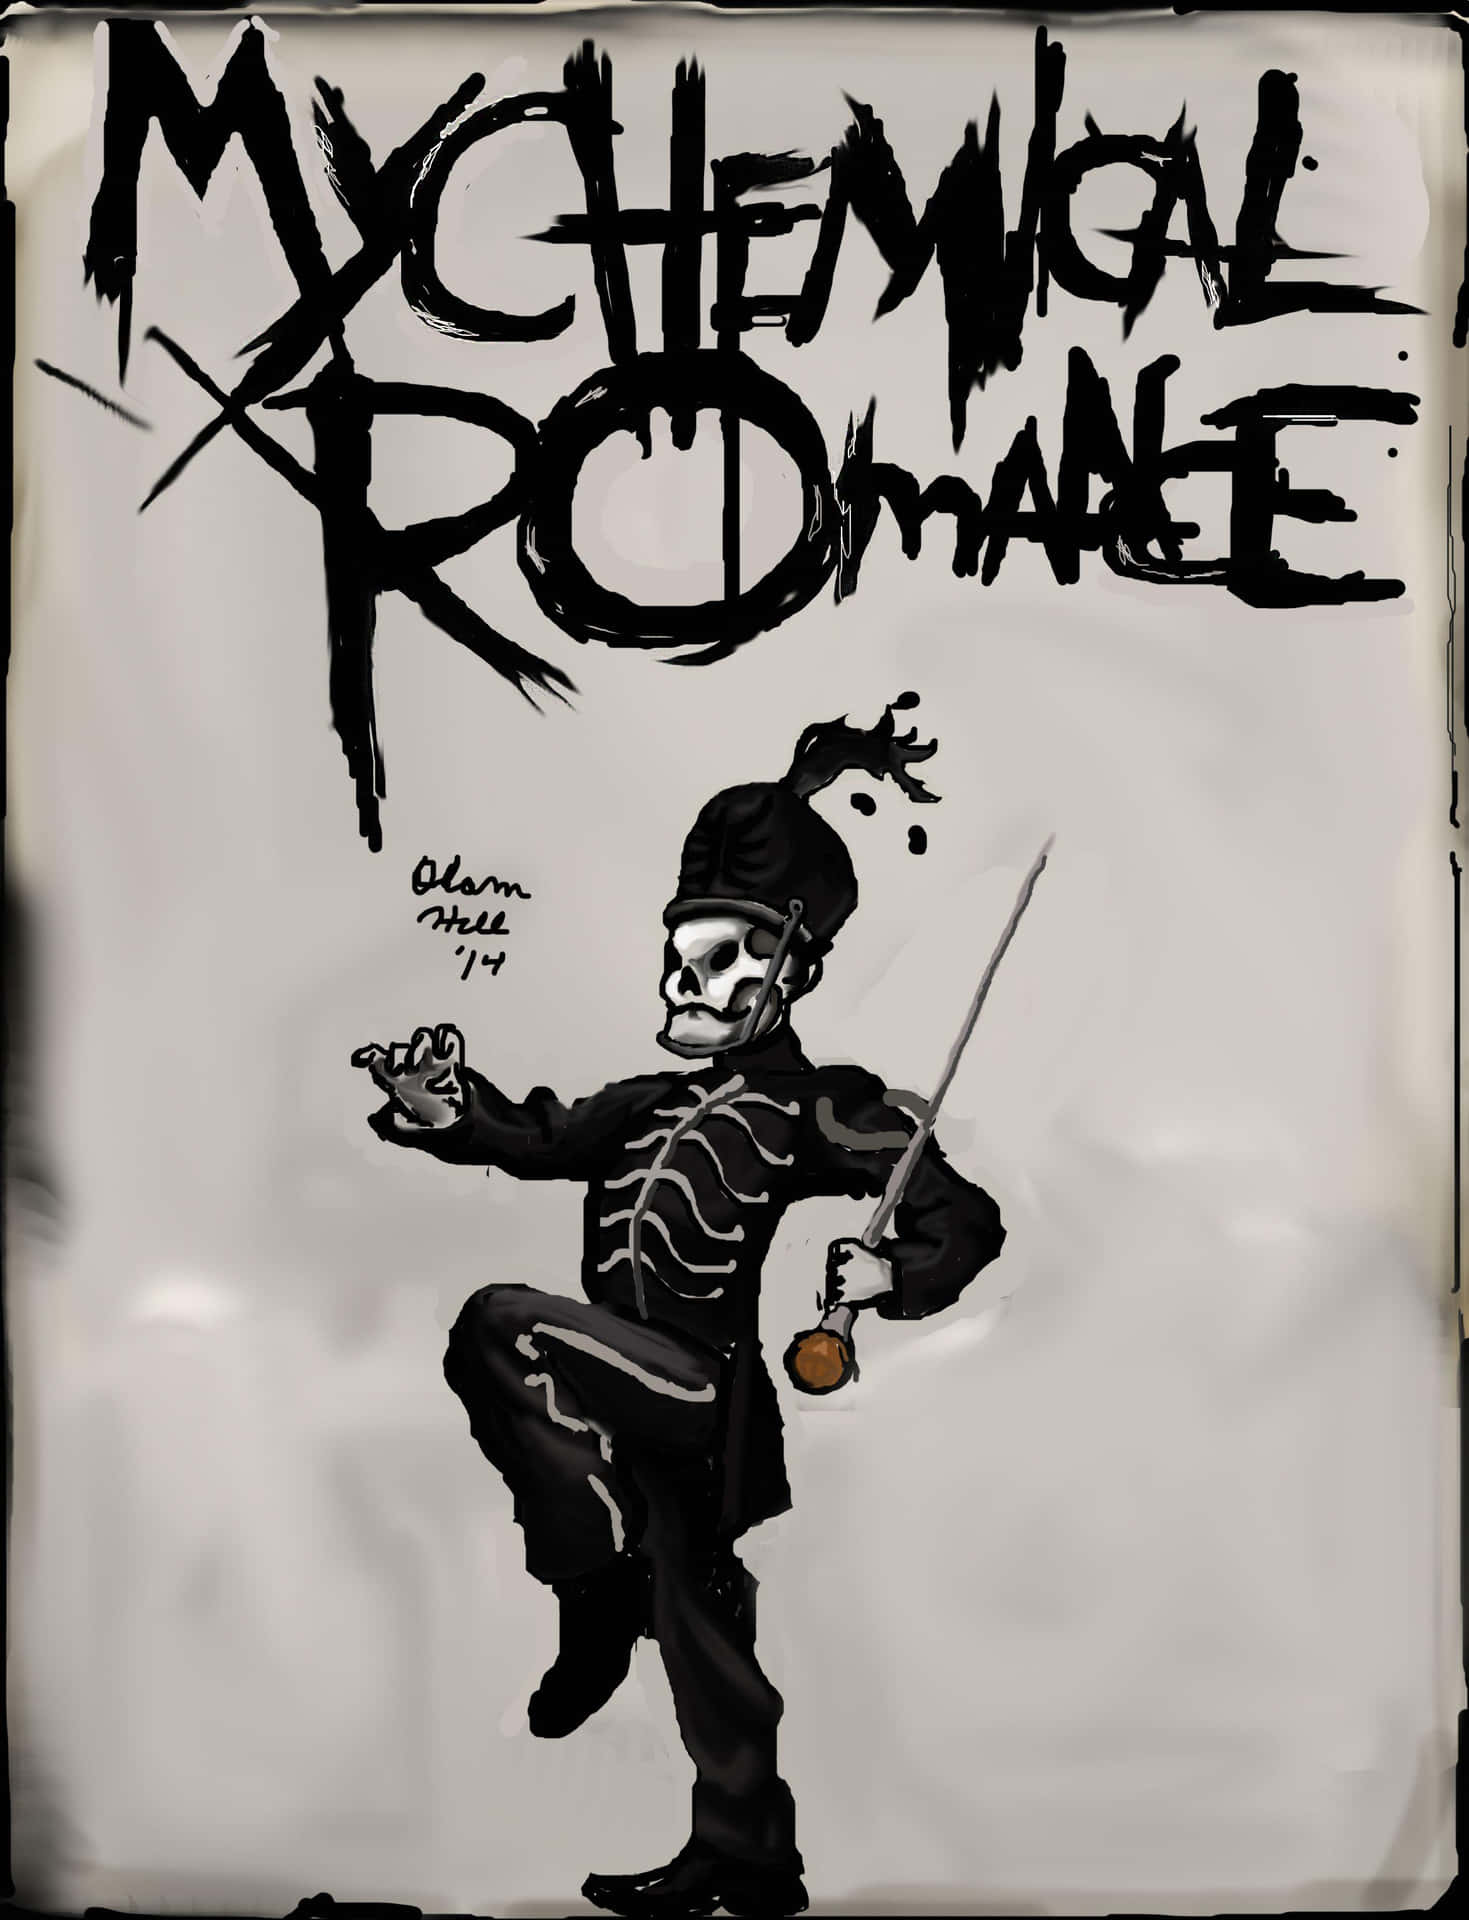 A Spectacular Snapshot of My Chemical Romance Wallpaper